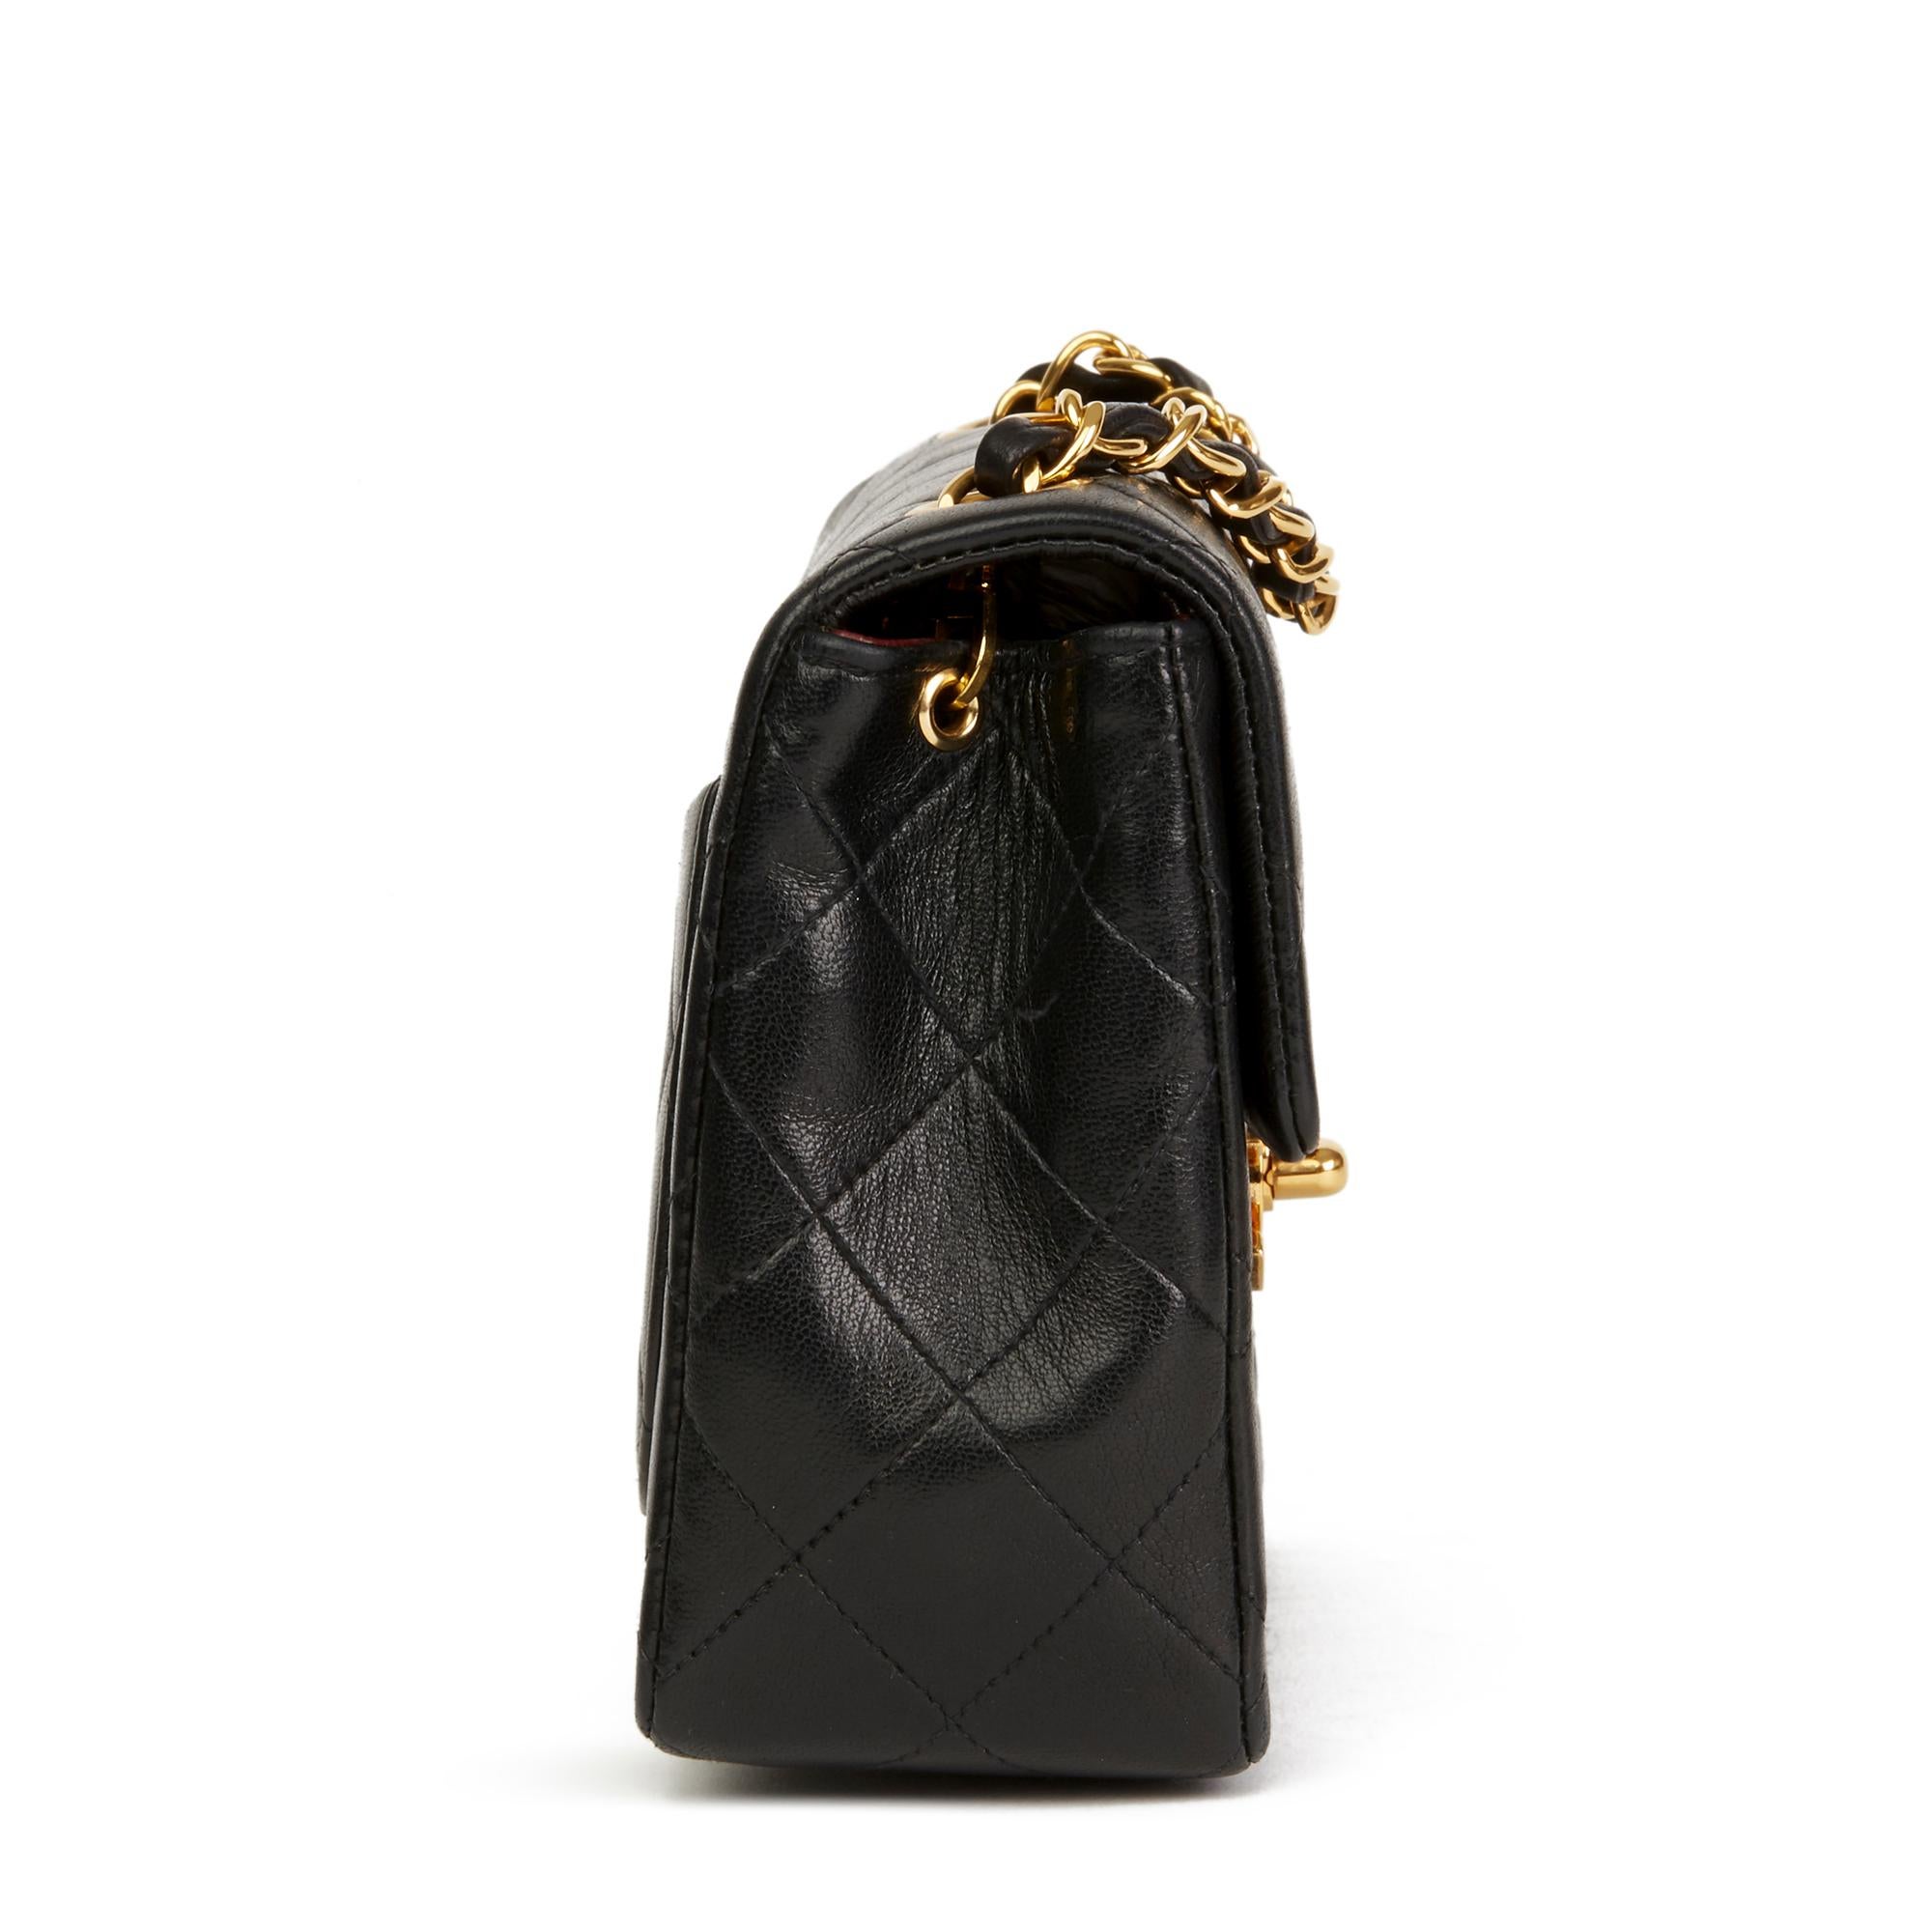 1991 Chanel Black Quilted Lambskin Vintage Mini Flap Bag 8